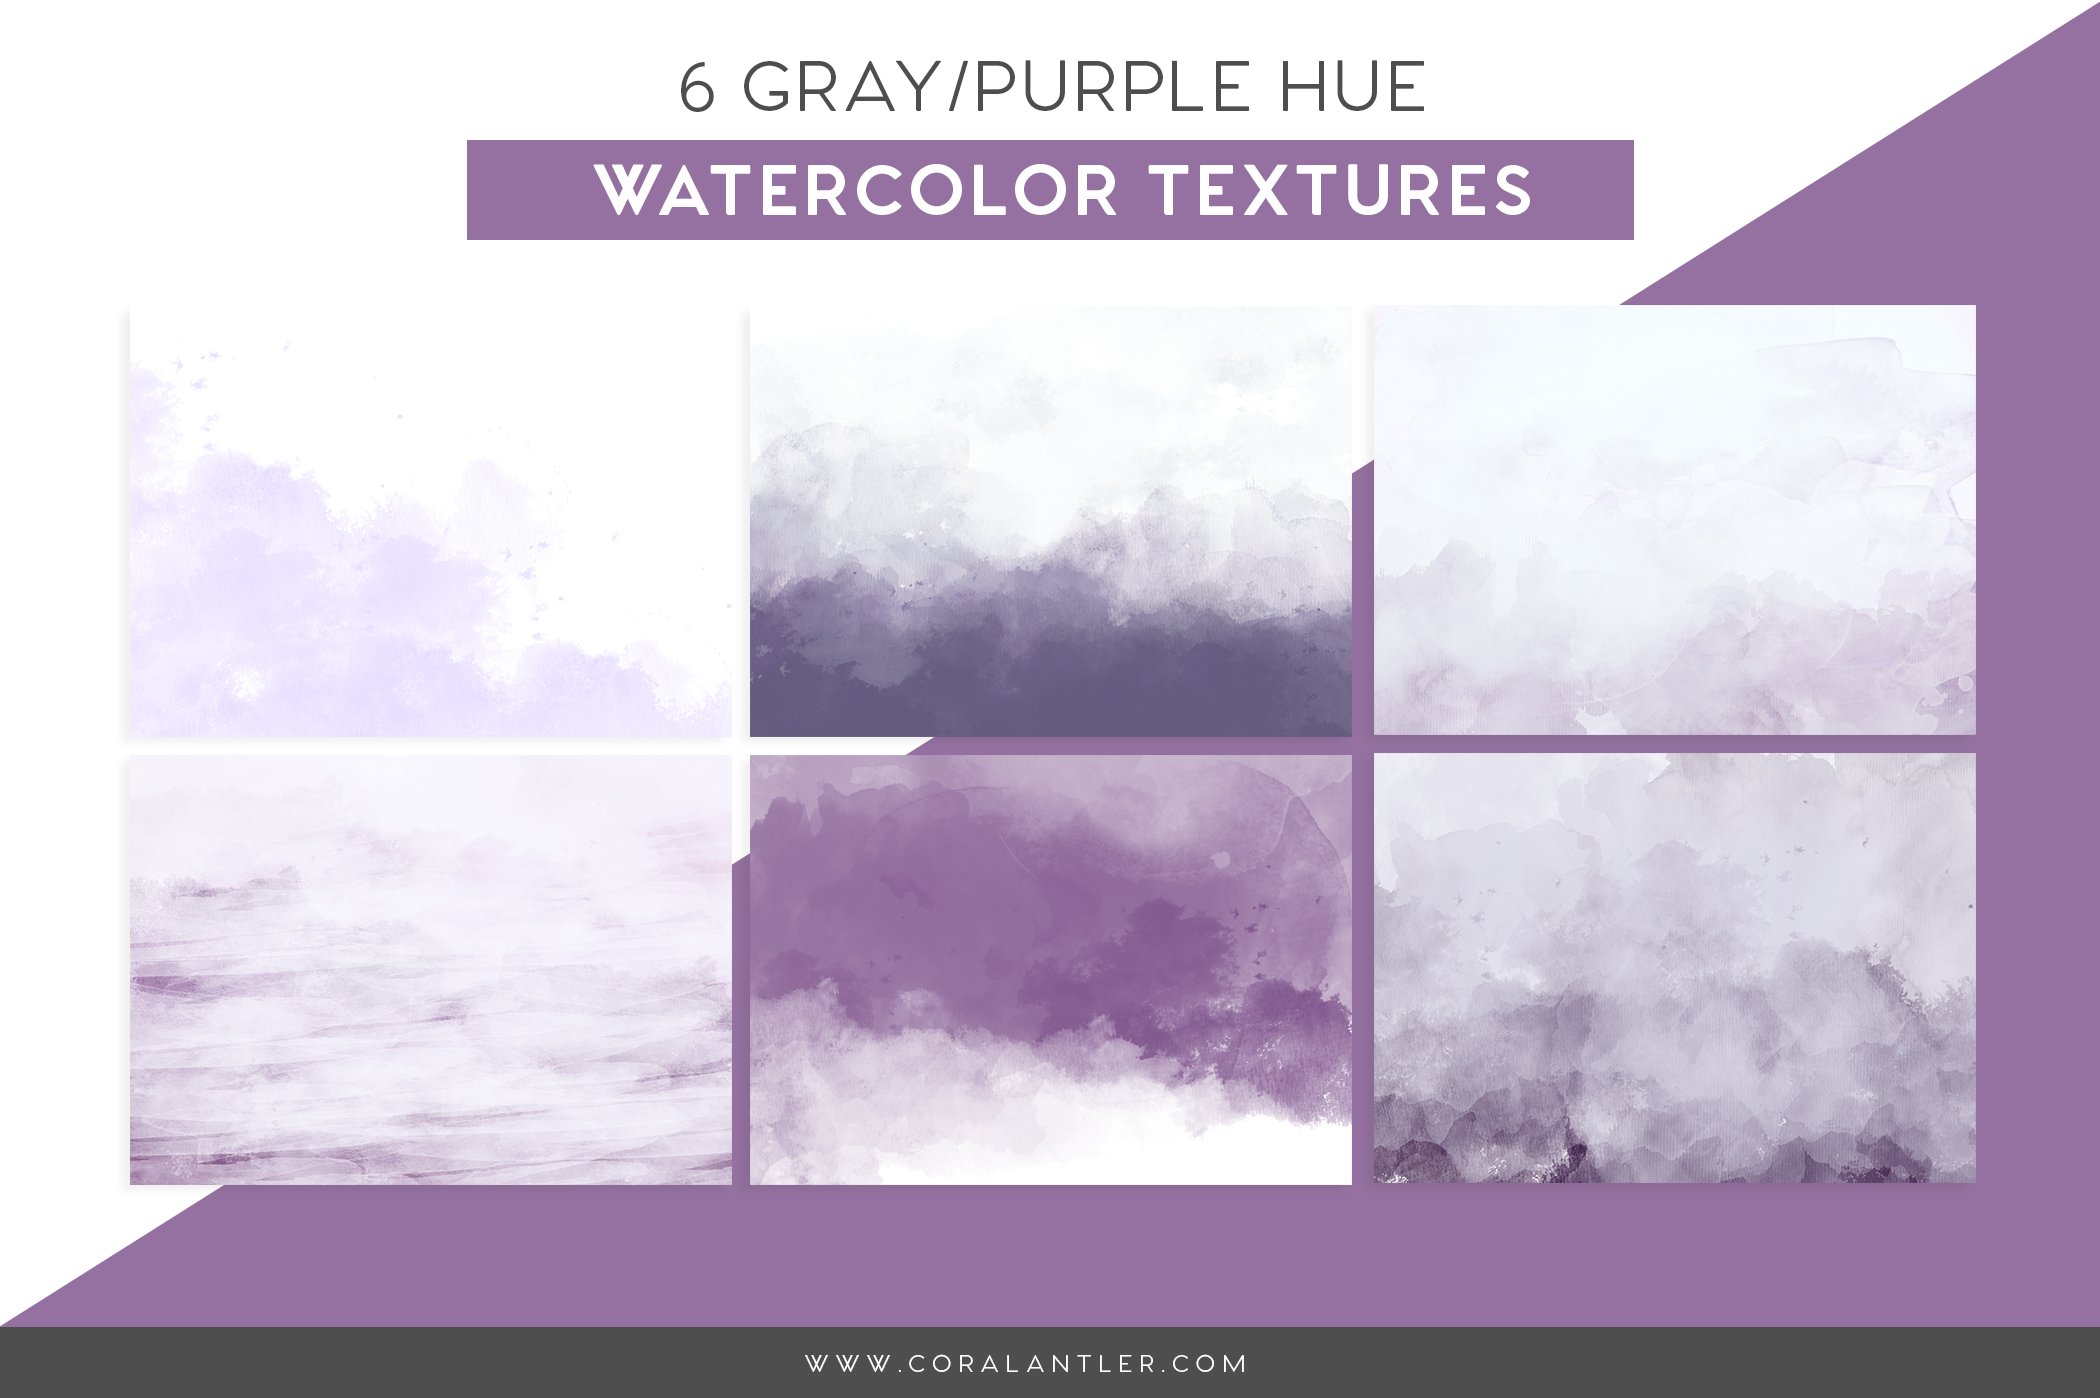 Purple Watercolor Textures cover image.